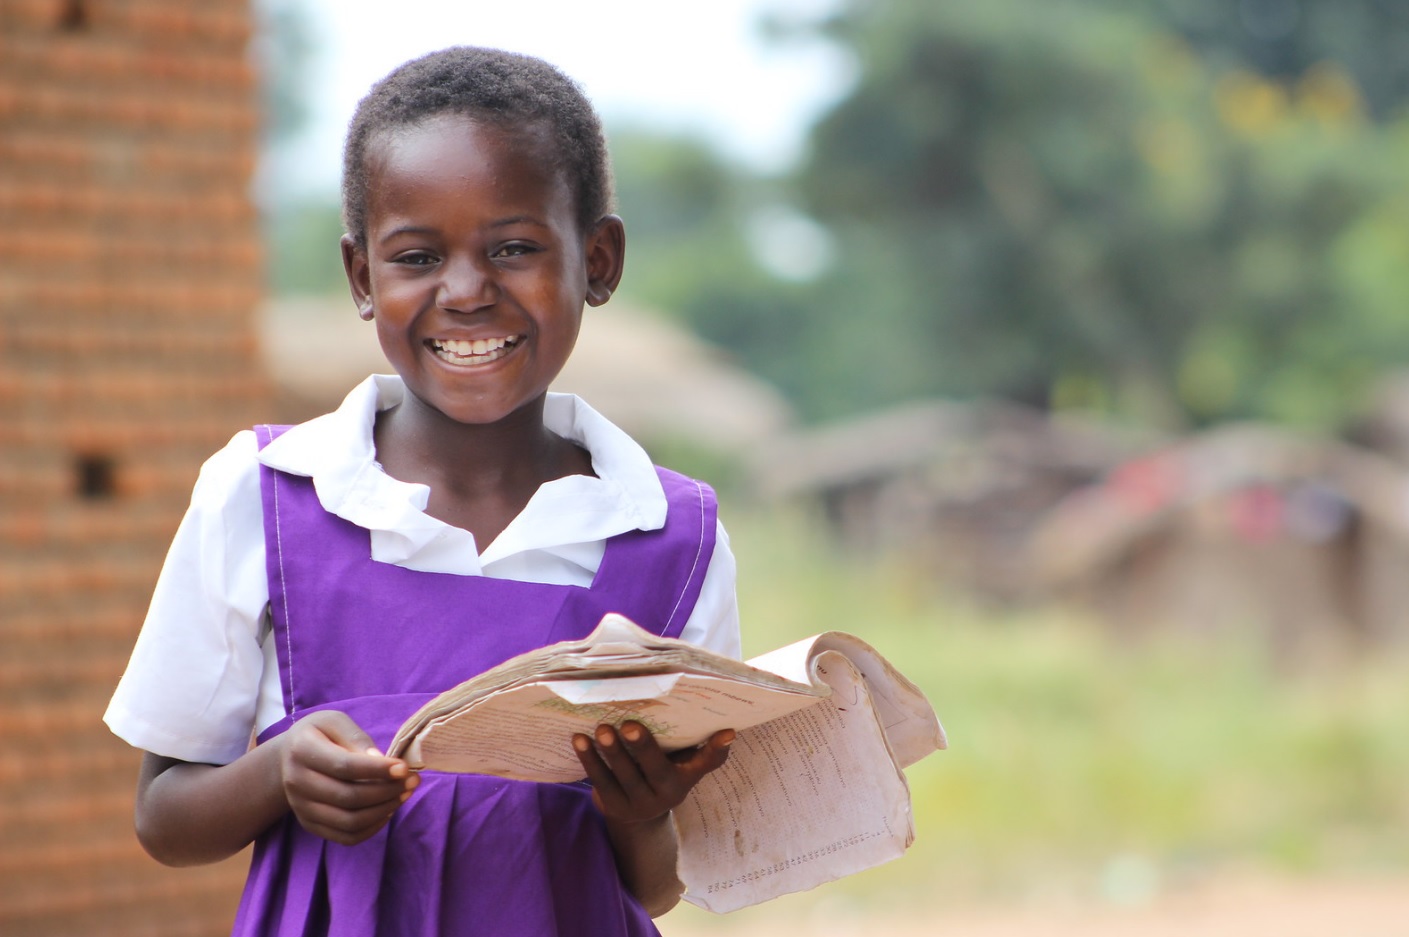 GIG Logistics launches Back-2-School Giveaway for poor children in Ghana